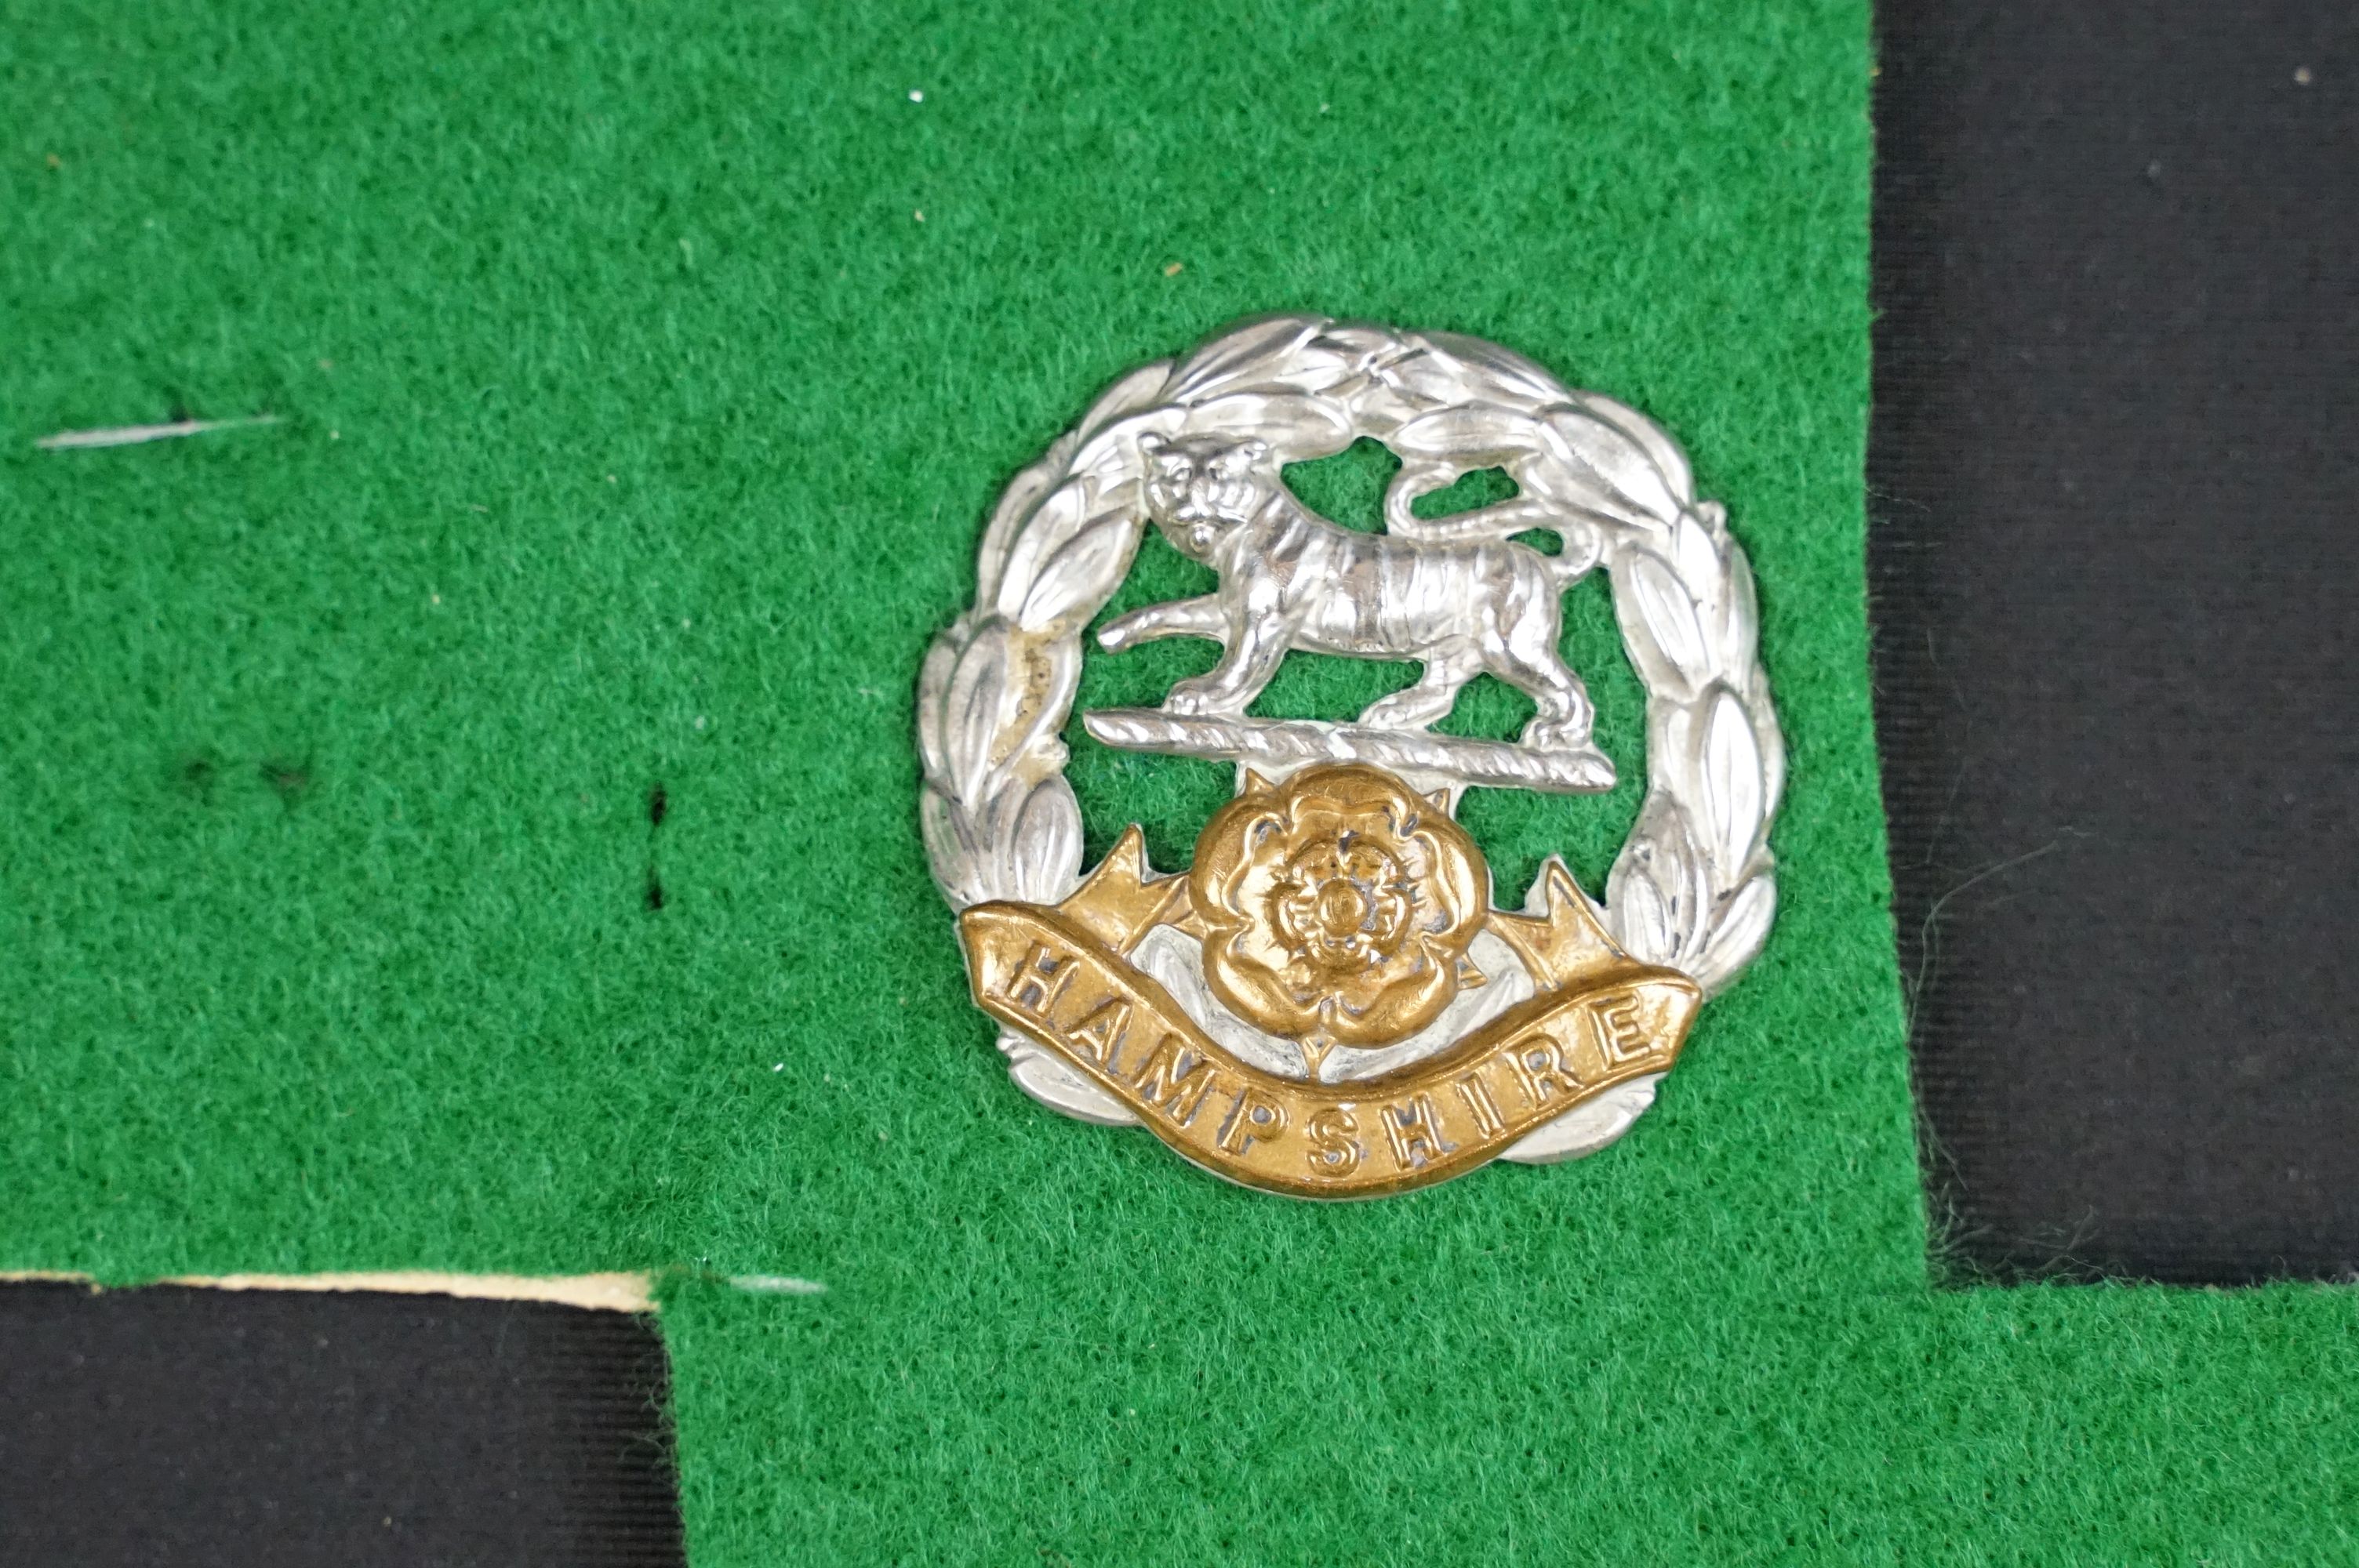 A collection of British The Hampshire Regiment cap badges, collar badges and shoulder titles to - Image 5 of 9